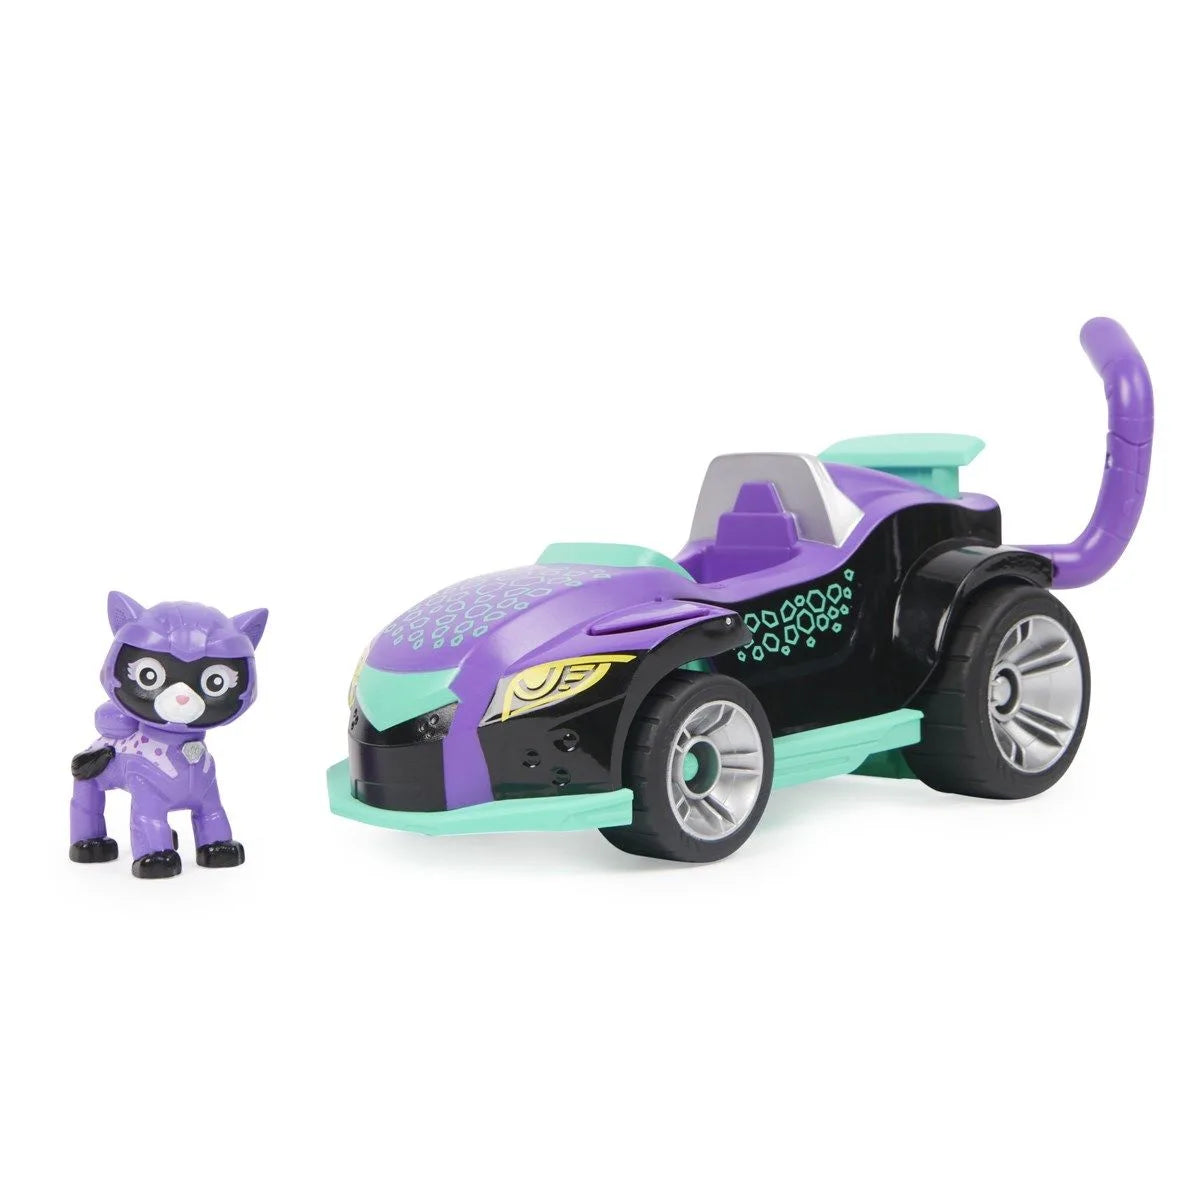 PAW Patrol, Cat Pack, Shade’s Transforming Toy Car with Action Figure